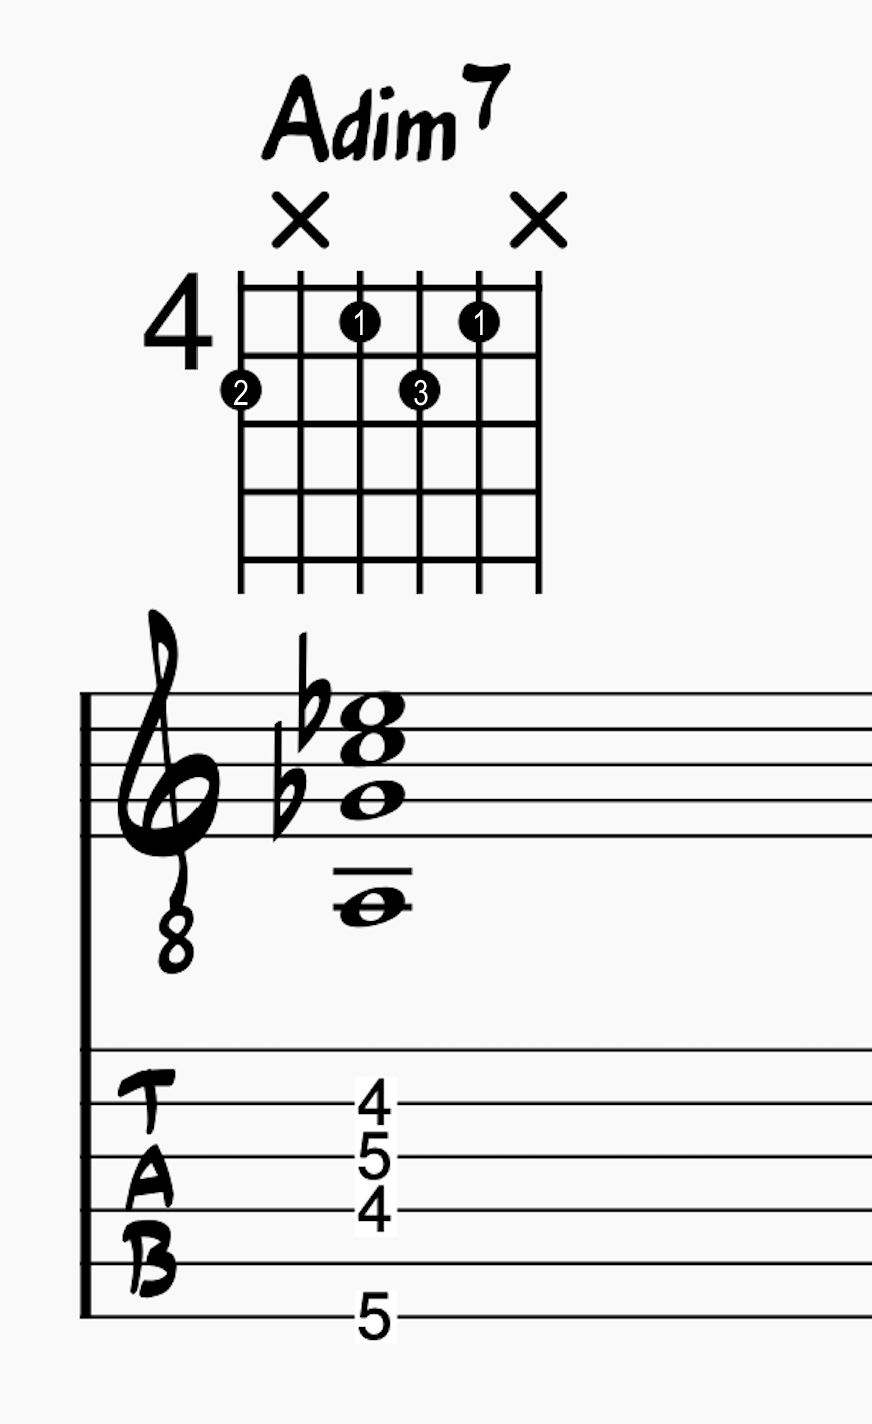 Fully Diminished Chord on the E-D-G-B String Group